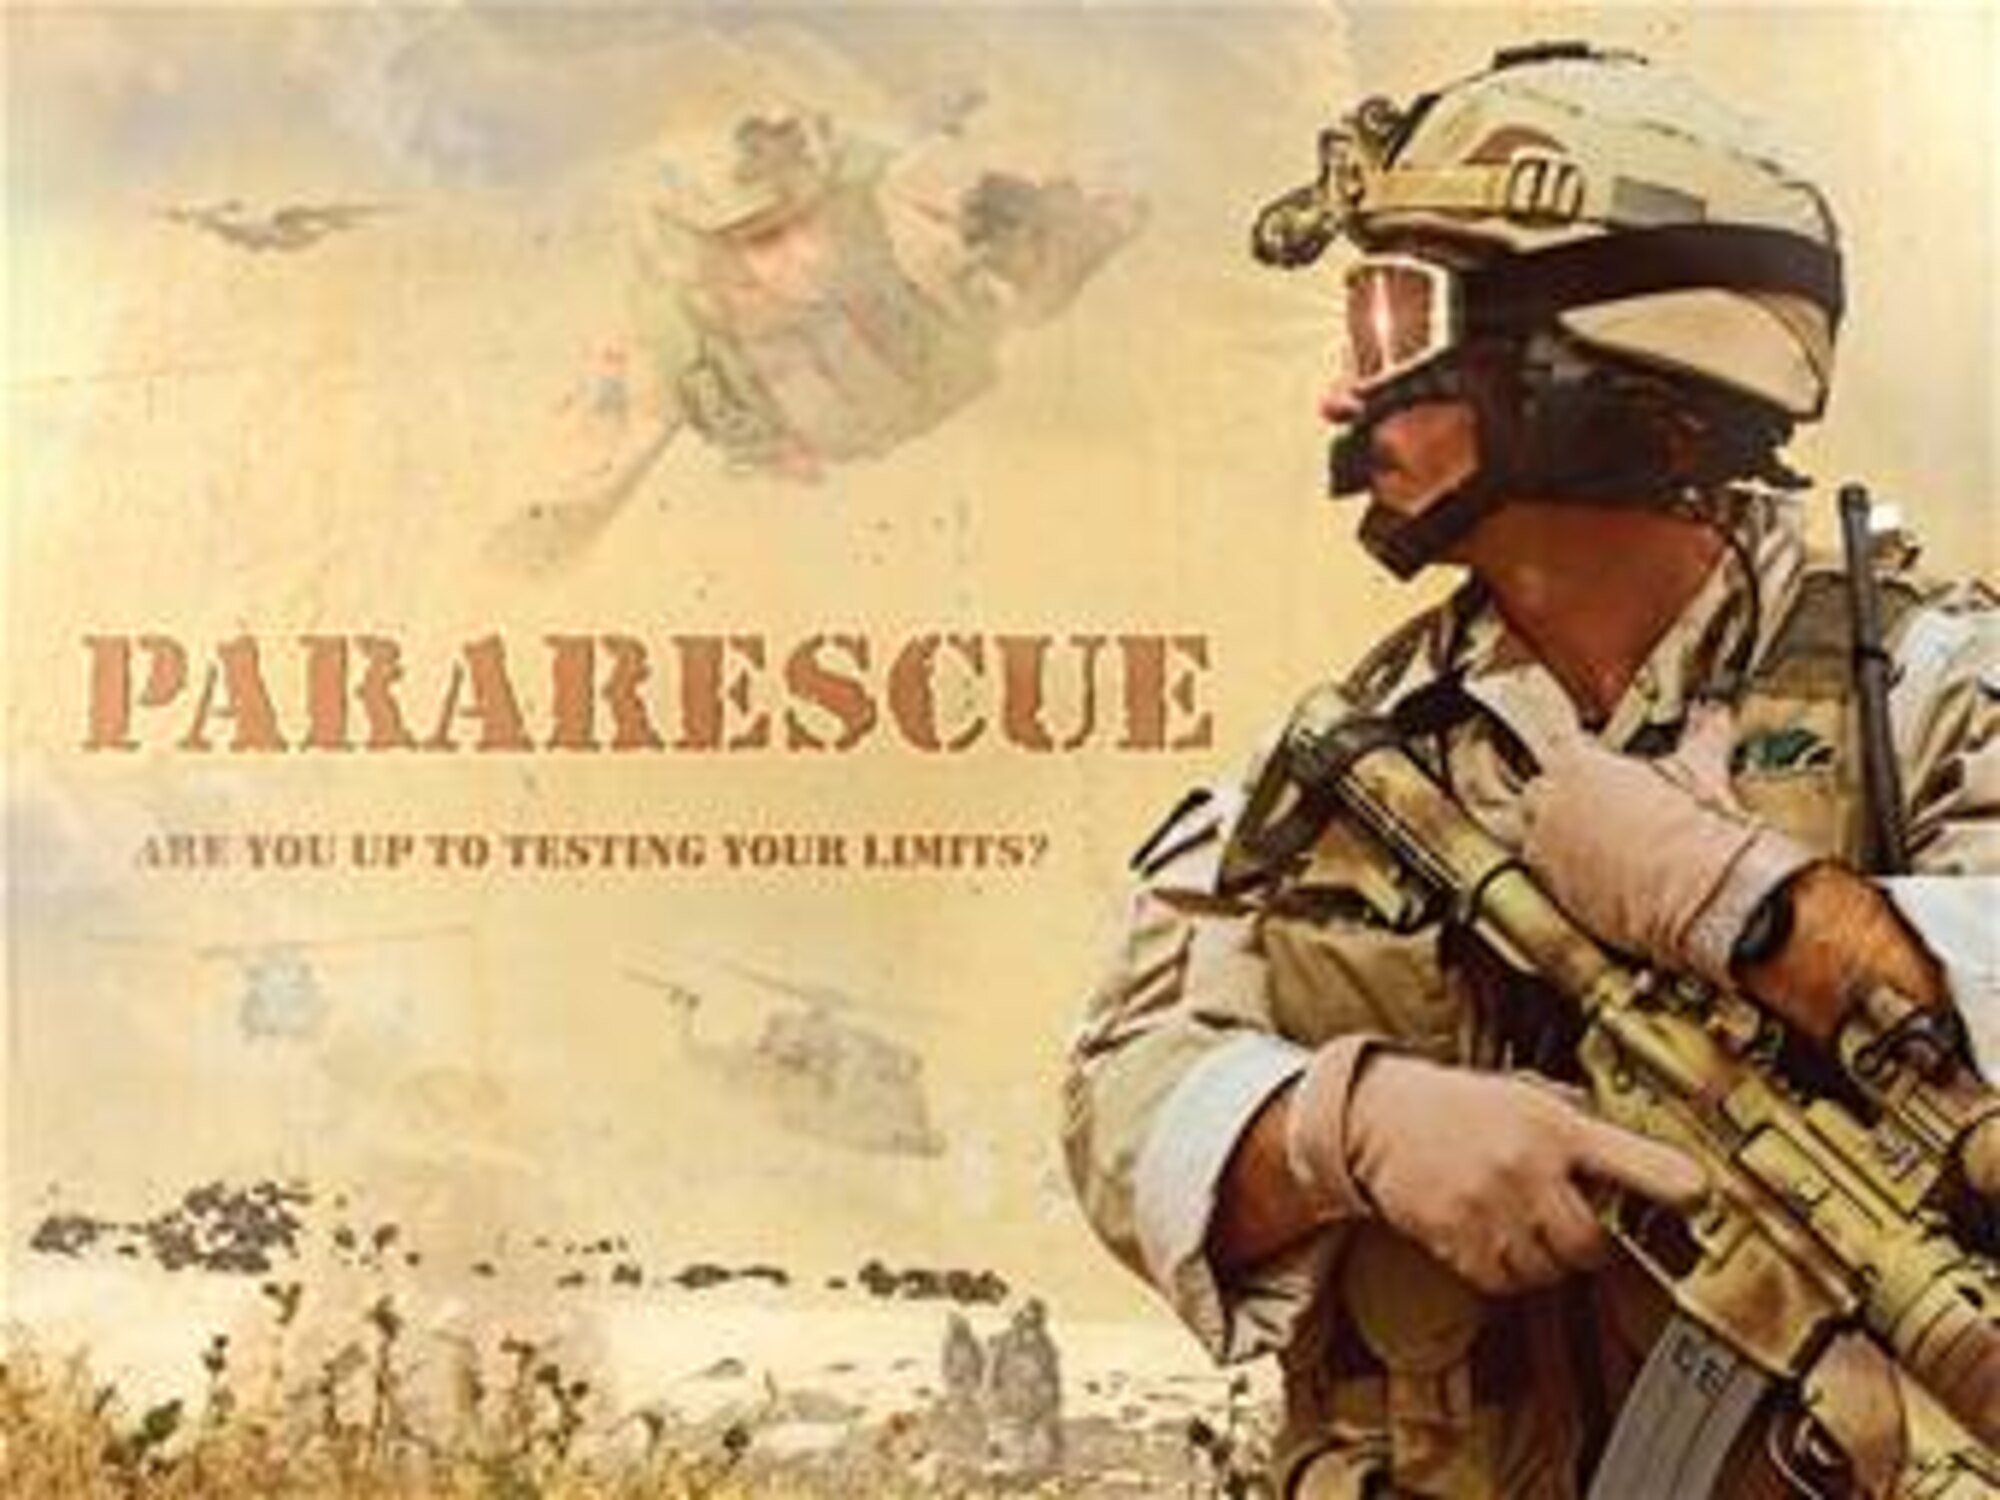 " Pararescue."  Created by Ken Chandler. This image is 10x7.5 @ 300 ppi. Printable (PDF) files for this image, up to 18x24 inches @ 300 ppi, are available by contacting afgraphics@dma.mil. This image is copyrighted and is the property of Ken Chandler and is available only to members of the armed forces and military organizations.